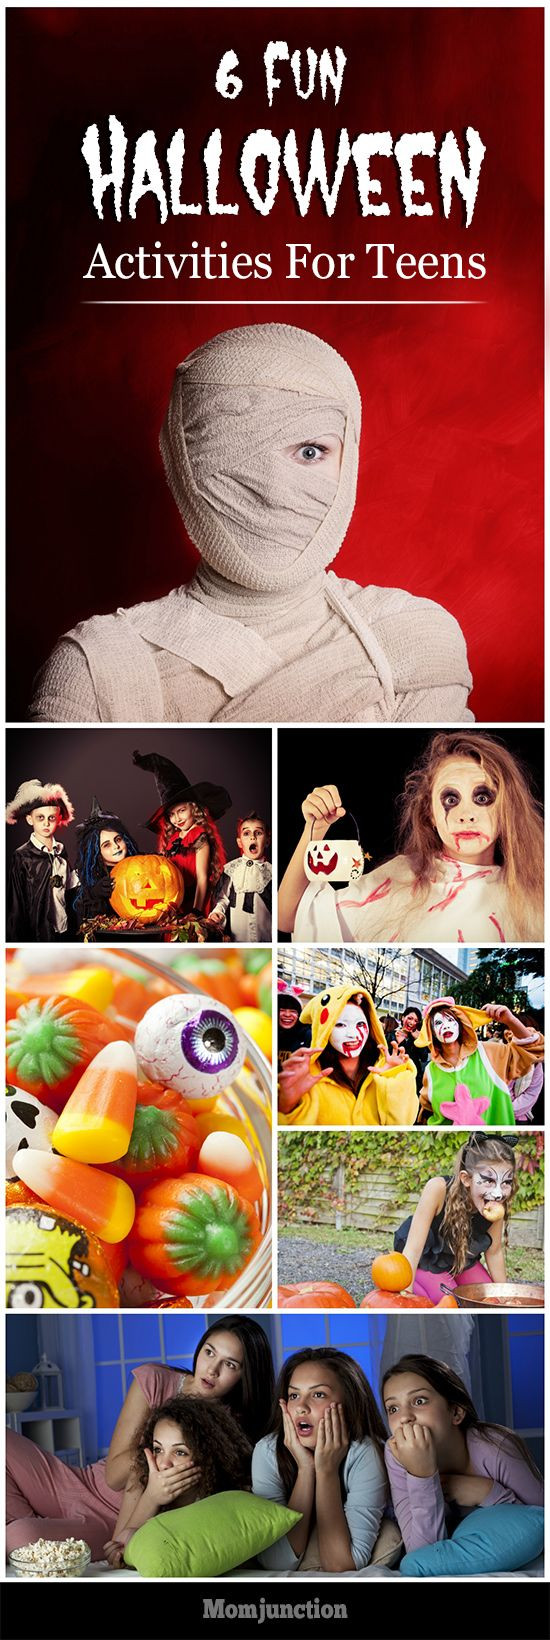 Halloween Party Game Ideas For Teens
 307 best images about Teen Topics on Pinterest